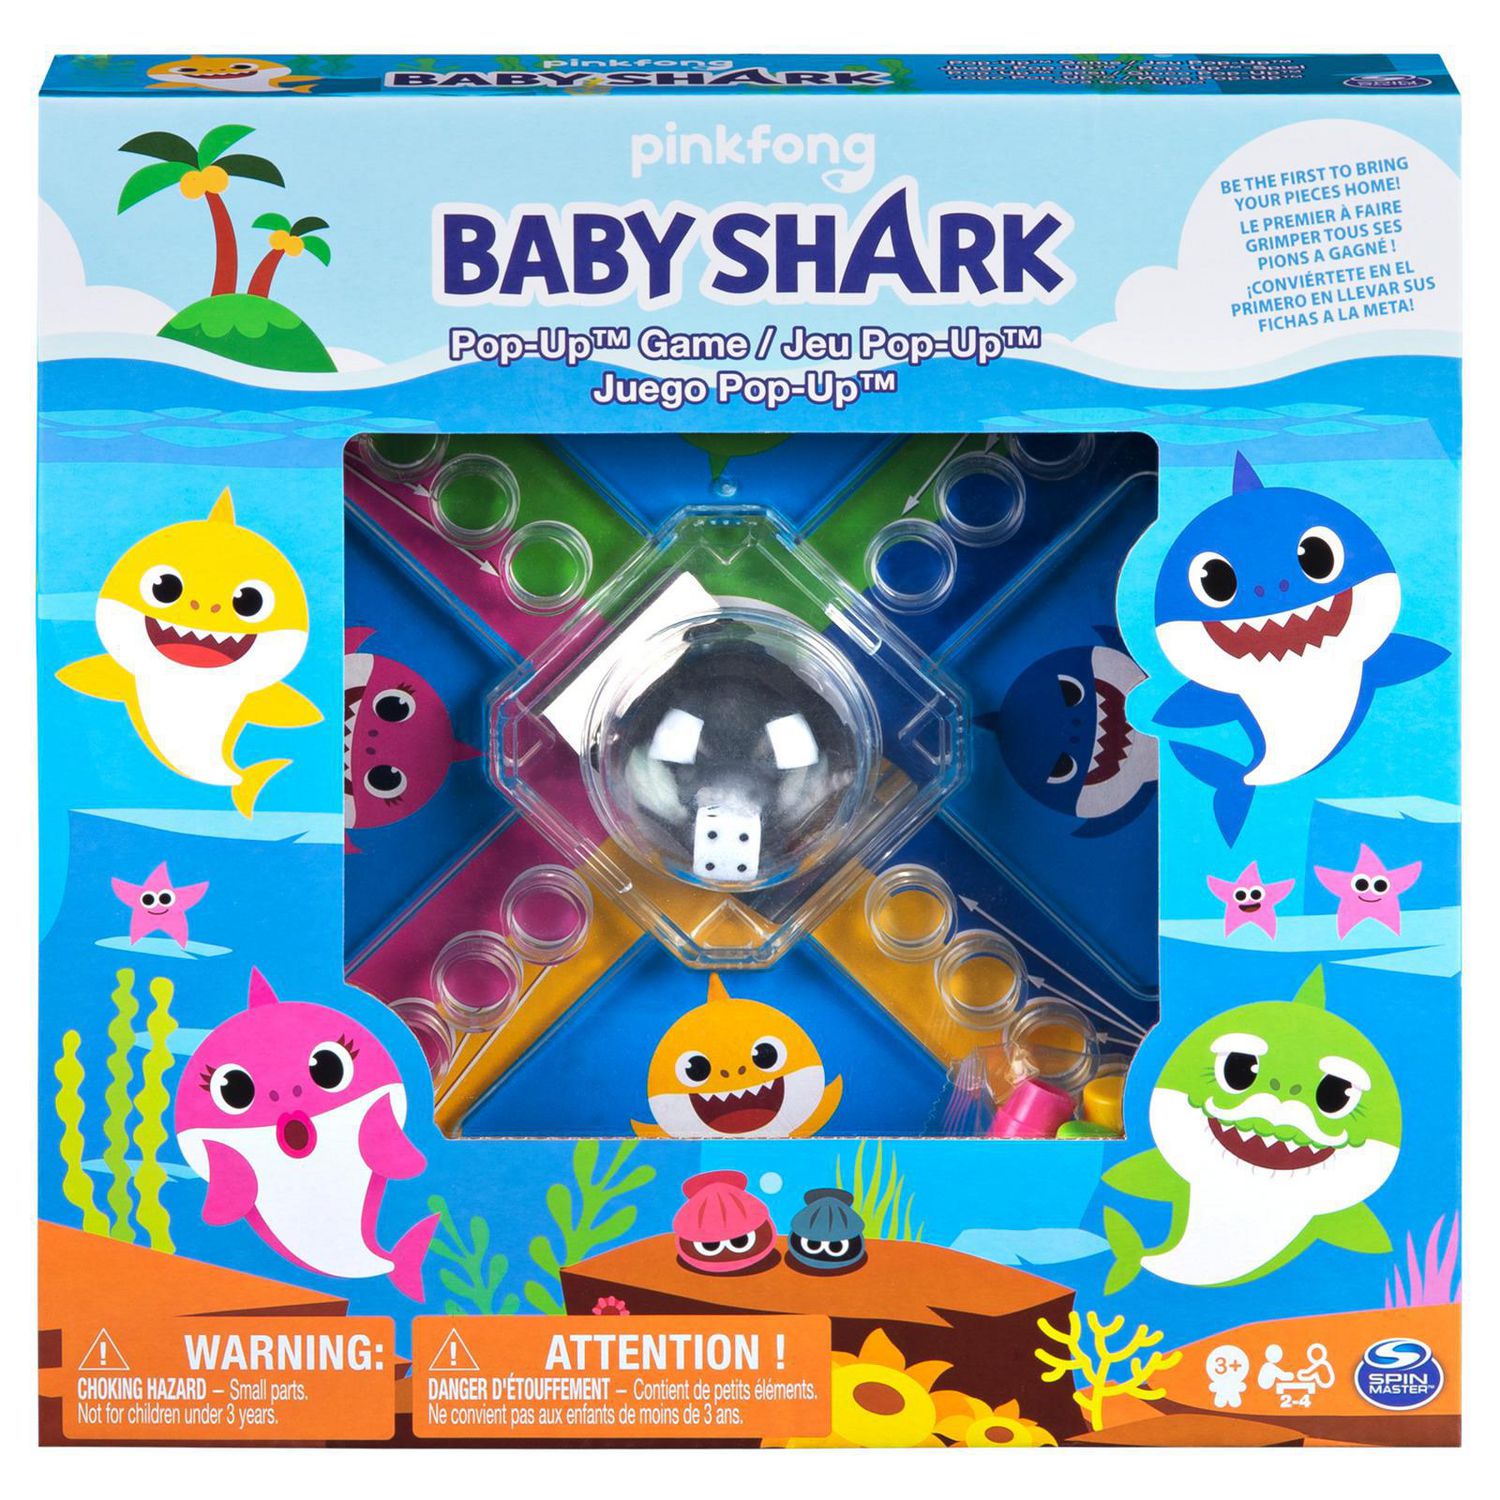 Pinkfong Baby Shark Classic Pop-Up Game for Kids 